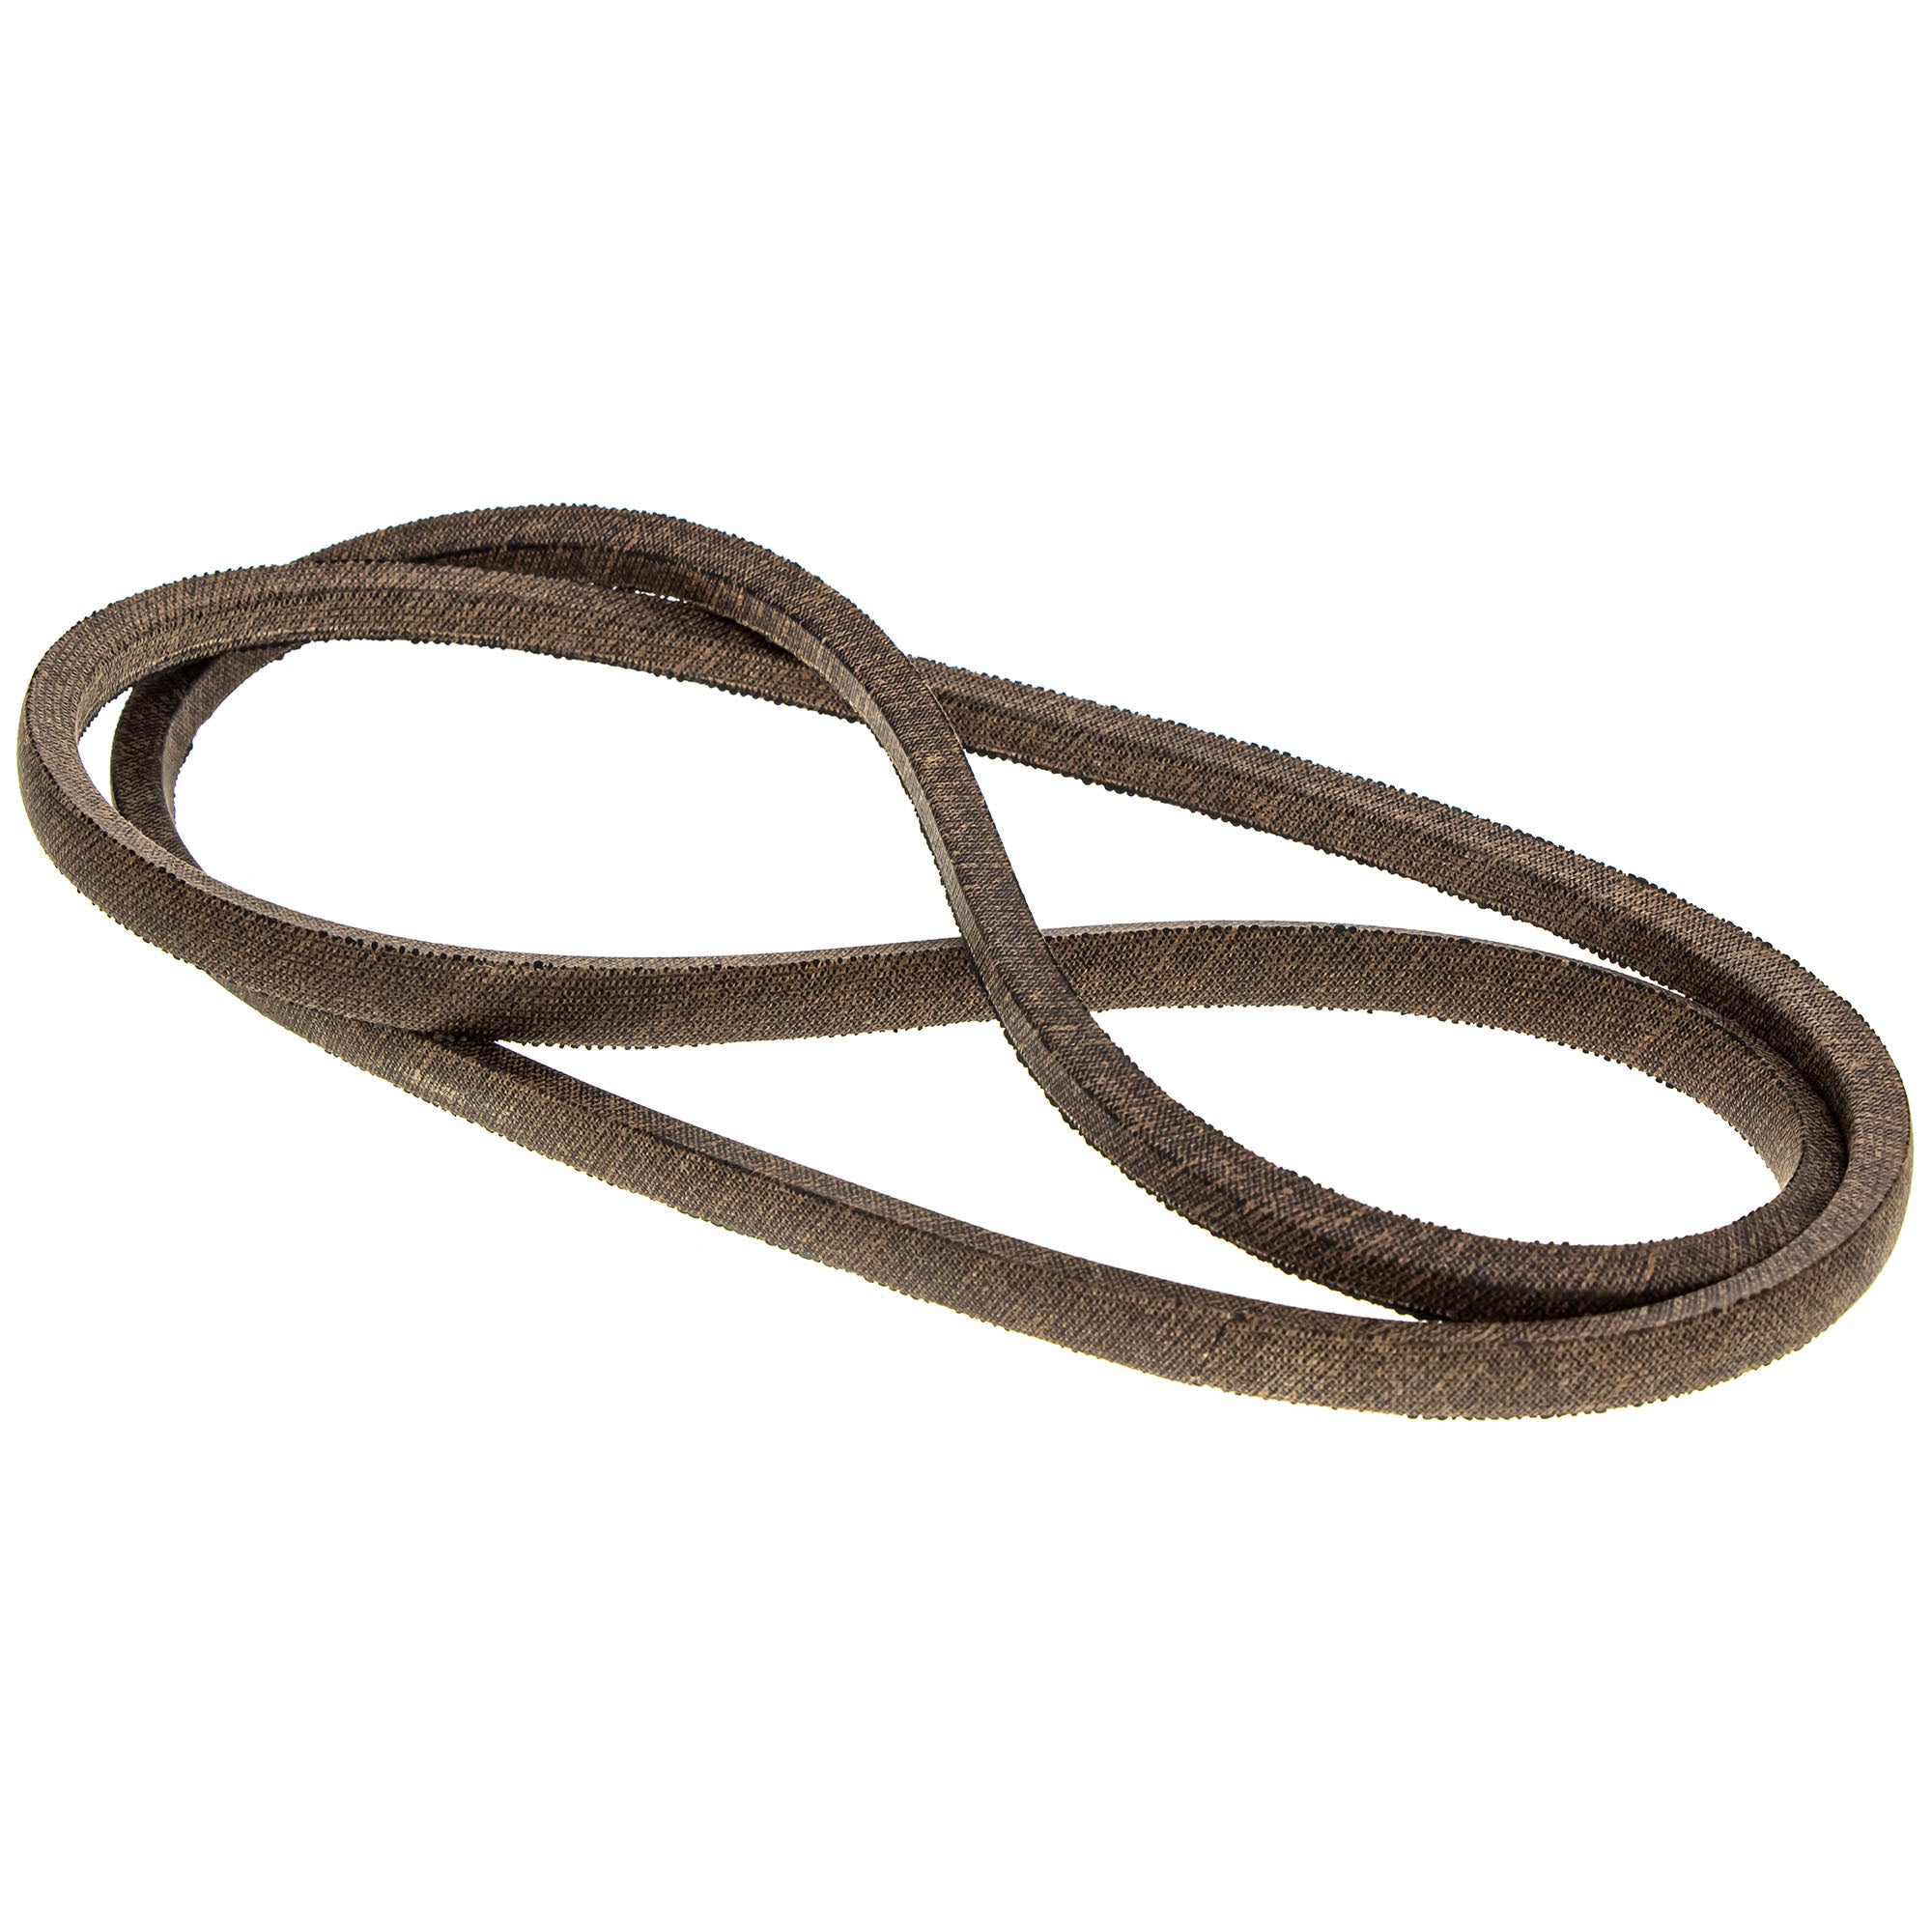 Line Trimmer Drive Belt (replaces 754-0489, 754-0625A, 954-0625,  OEM-754-0625) 954-0625A